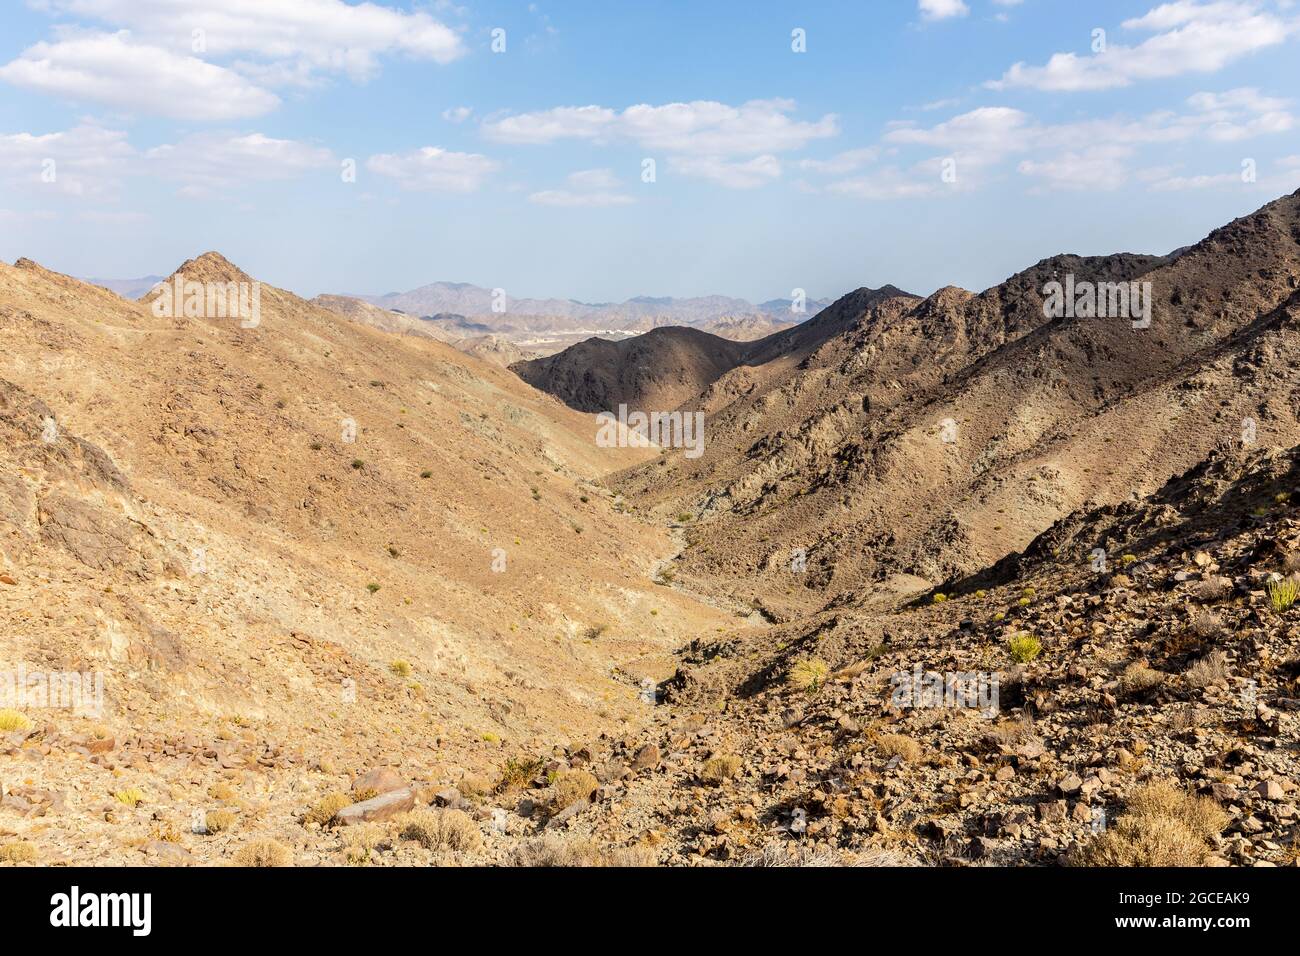 Al Hajar Mountains landscape seen from Copper Hike Summit, with rocky, dry riverbed (wadi) and barren mountain ridges, Hatta, United Arab Emirates. Stock Photo